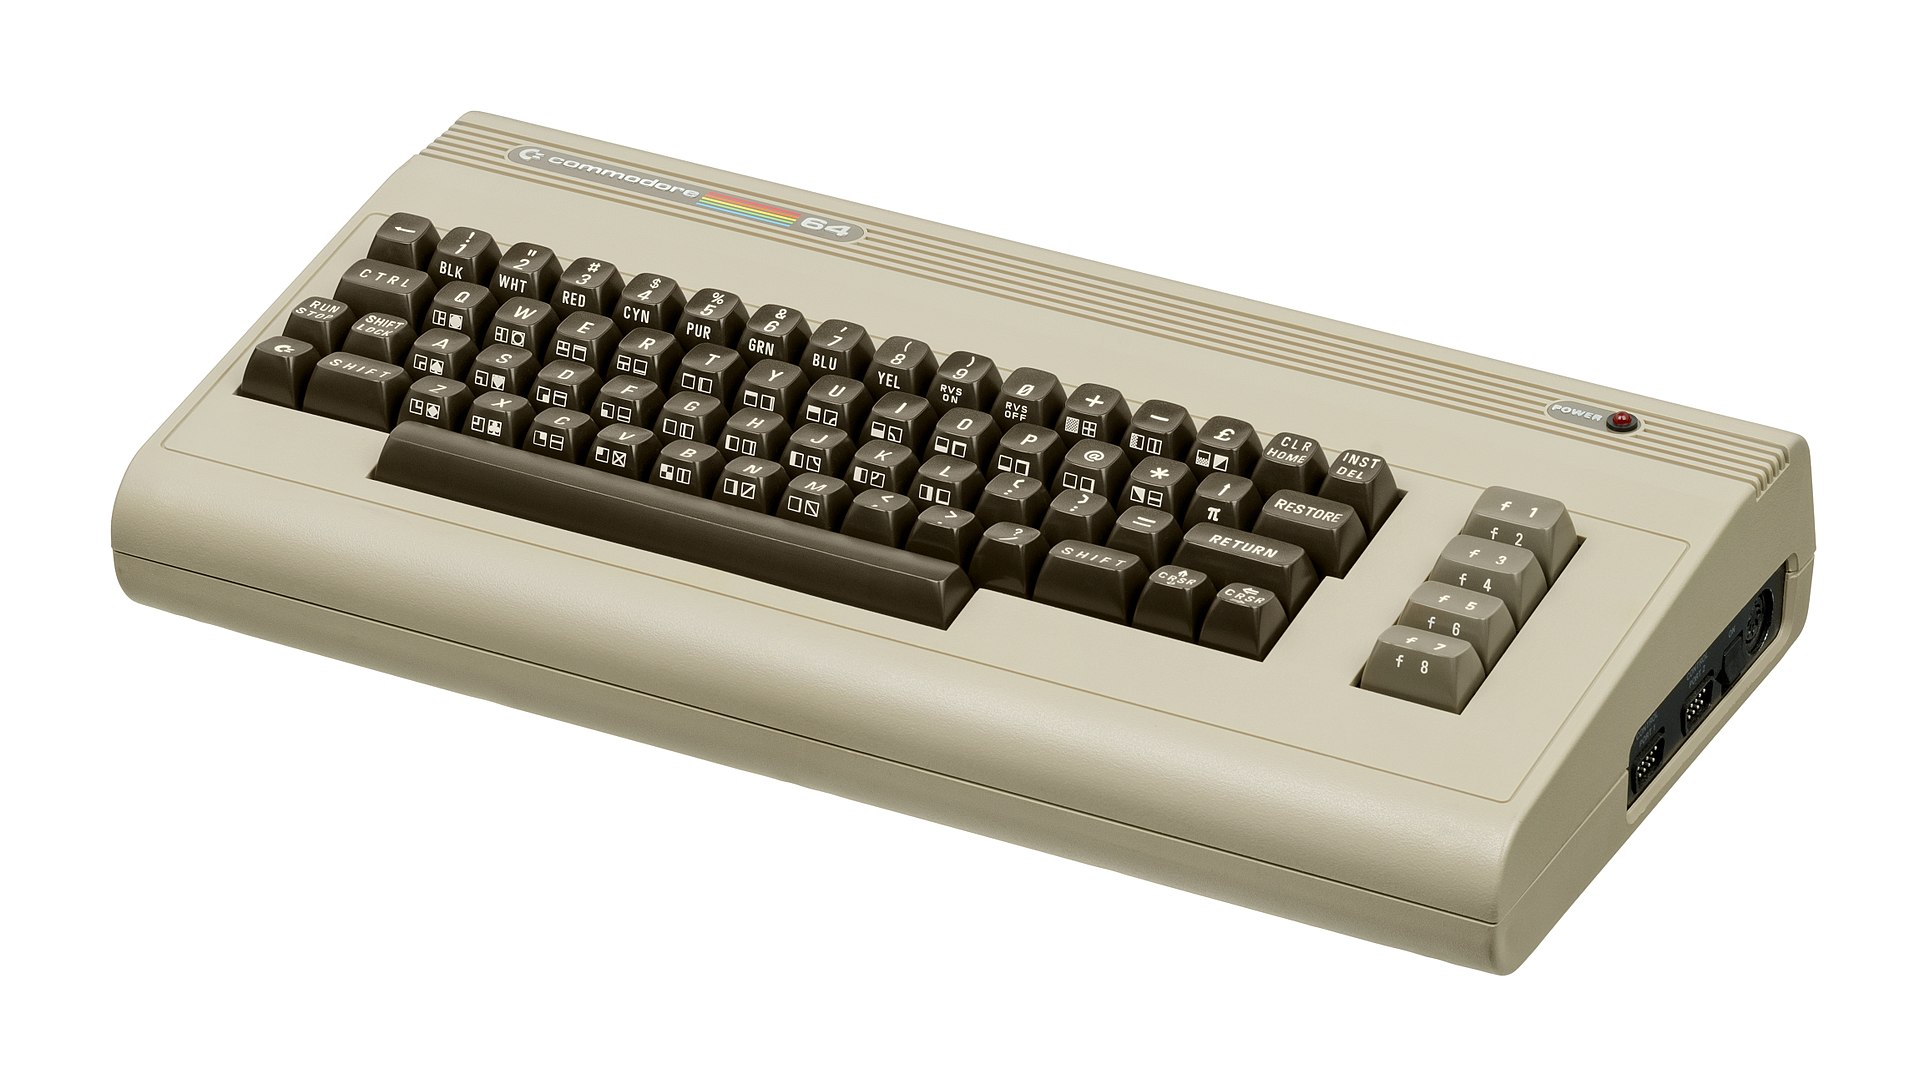 The C64 Breadbin, the best selling computer of the 80's. 